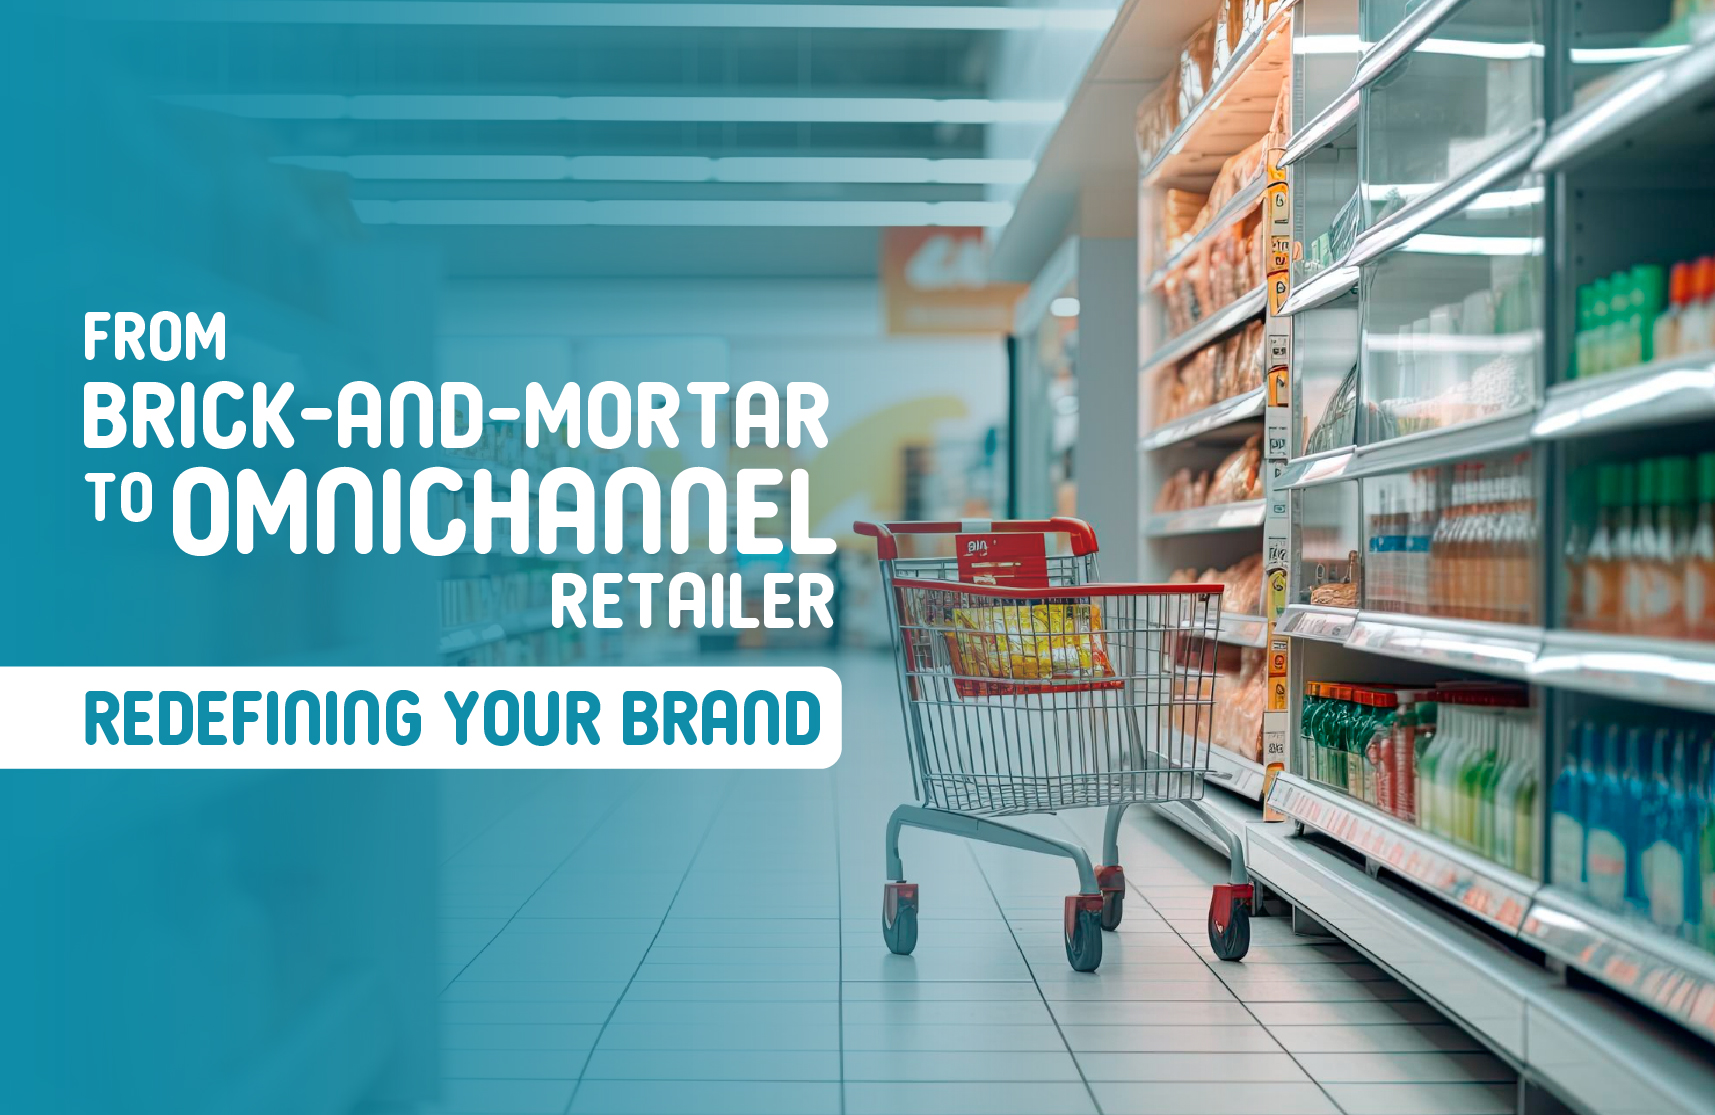 From Brick-and-Mortar to Omnichannel Retailer: Redefining Your Brand